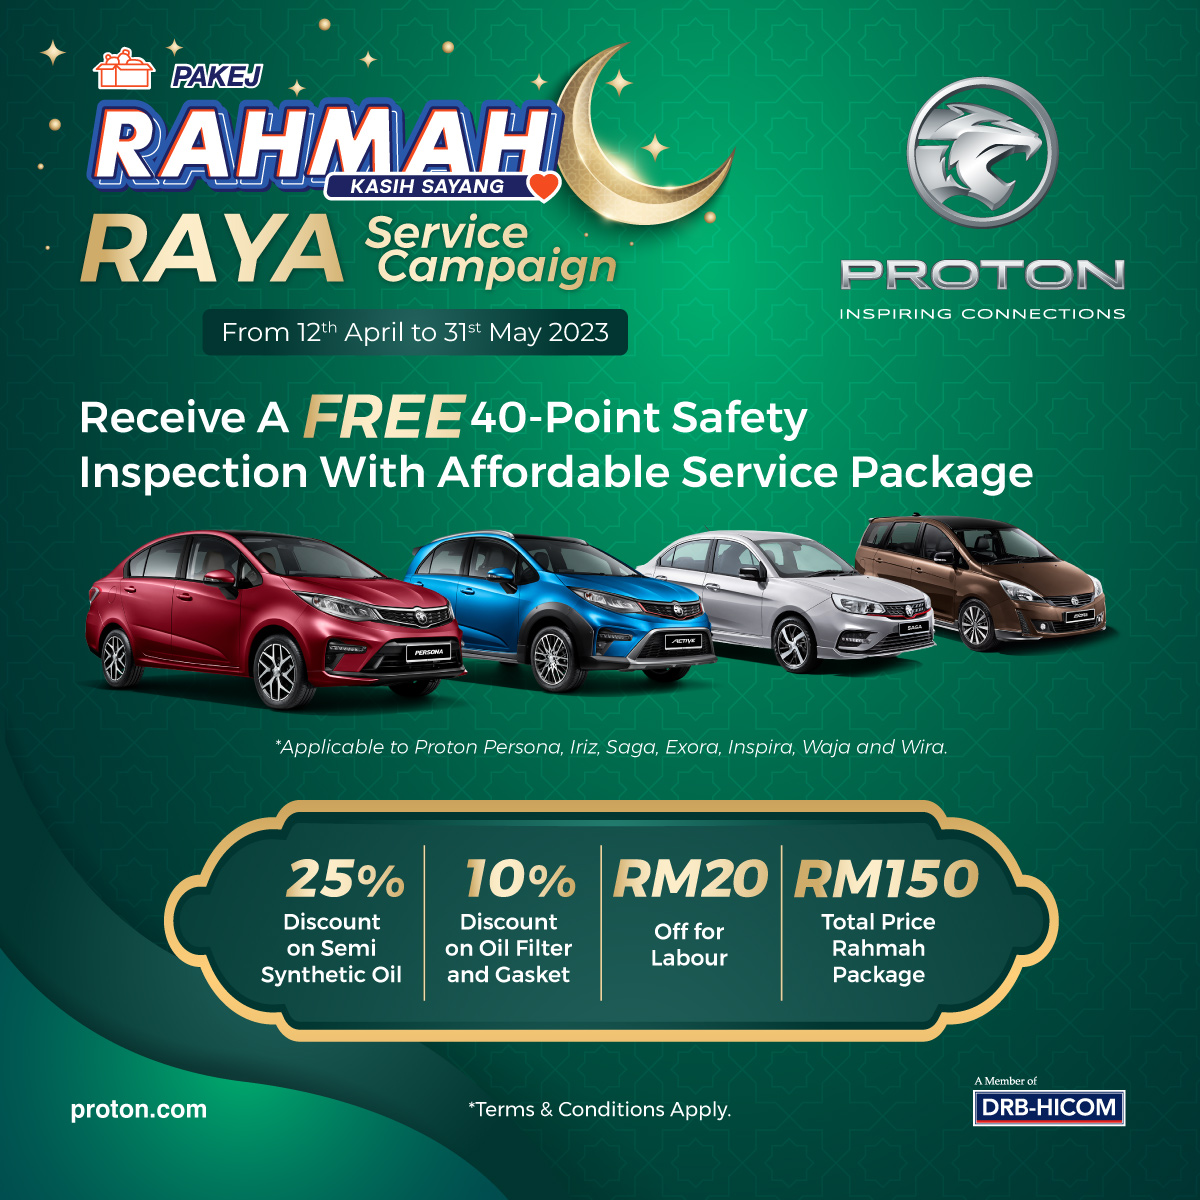 aftersales, malaysia, proton, proton offers its version of menu rahmah until 31 may 2023